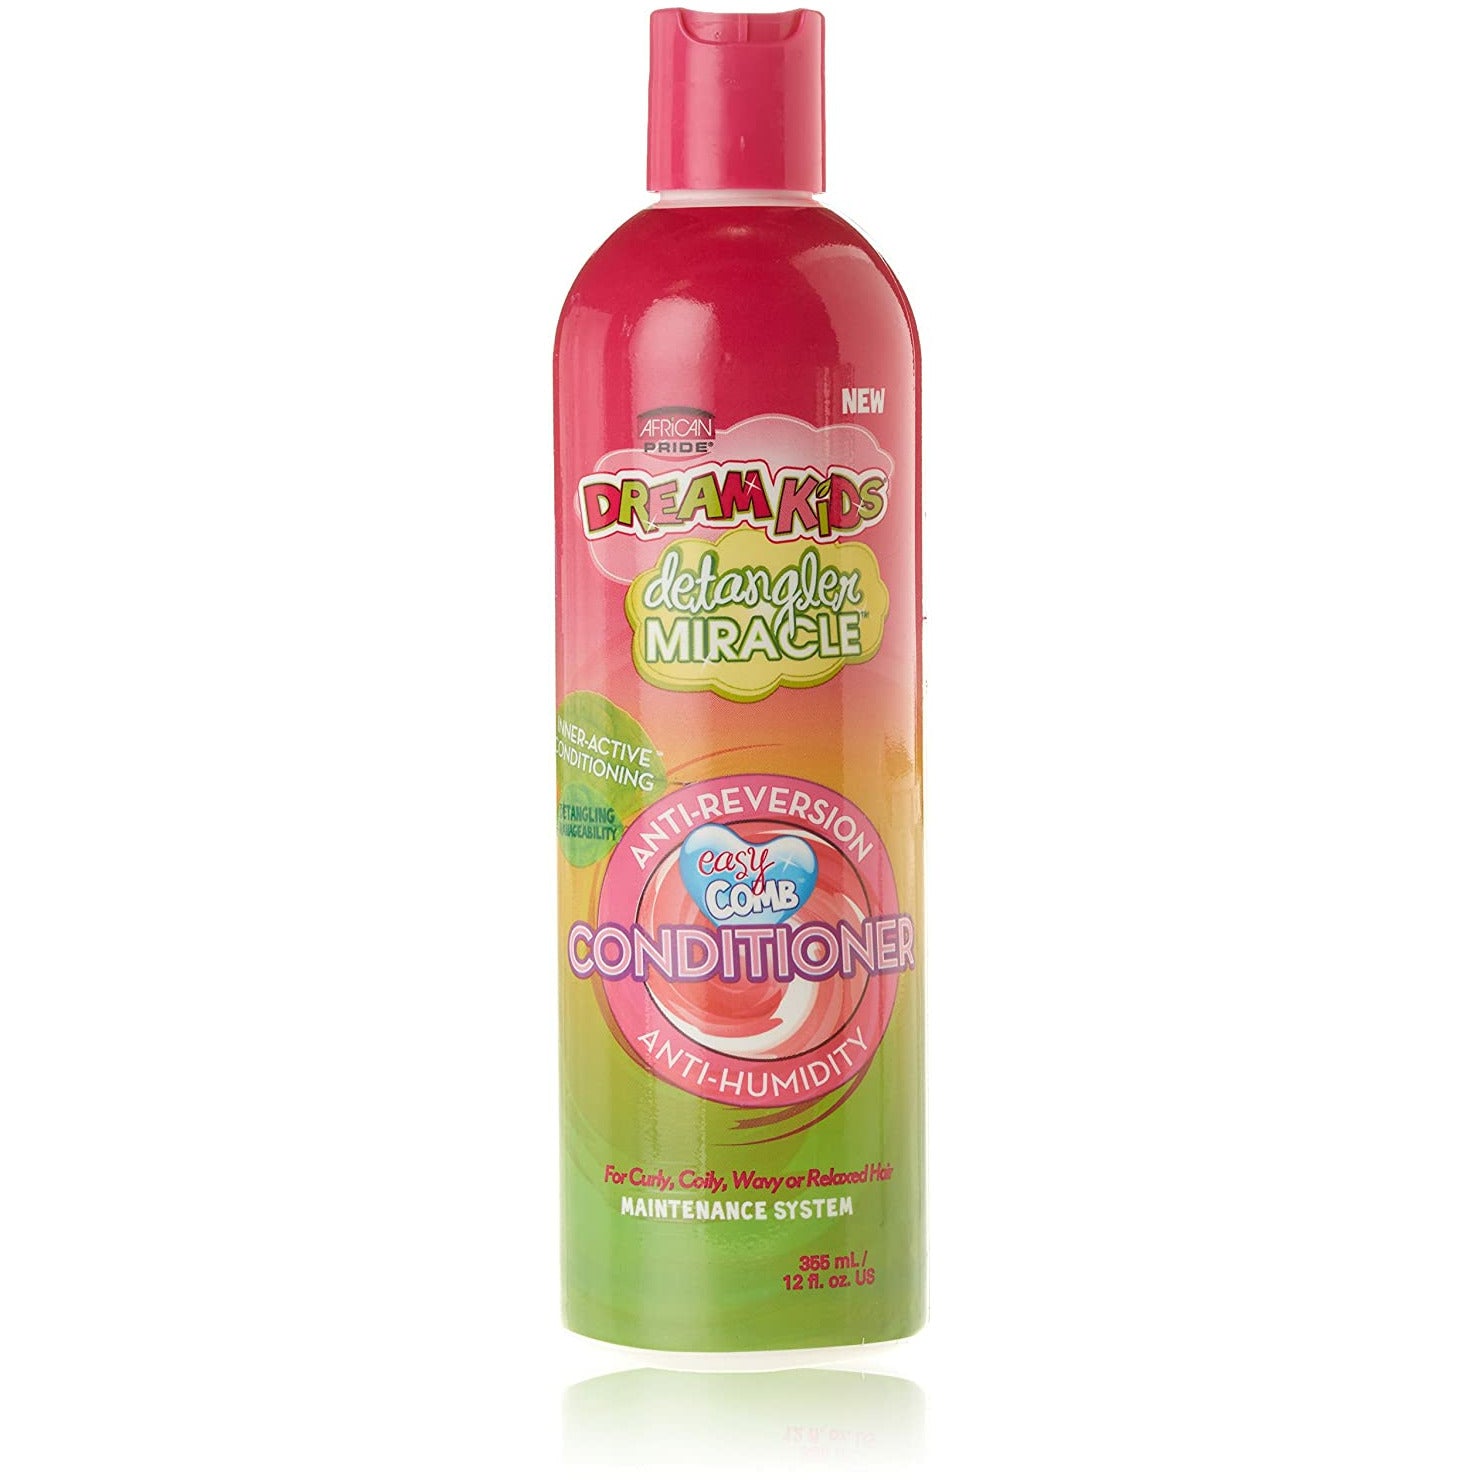 DREAM KIDS EASY COMB CONDITIONER 12.1oz-African Pride- Hive Beauty Supply